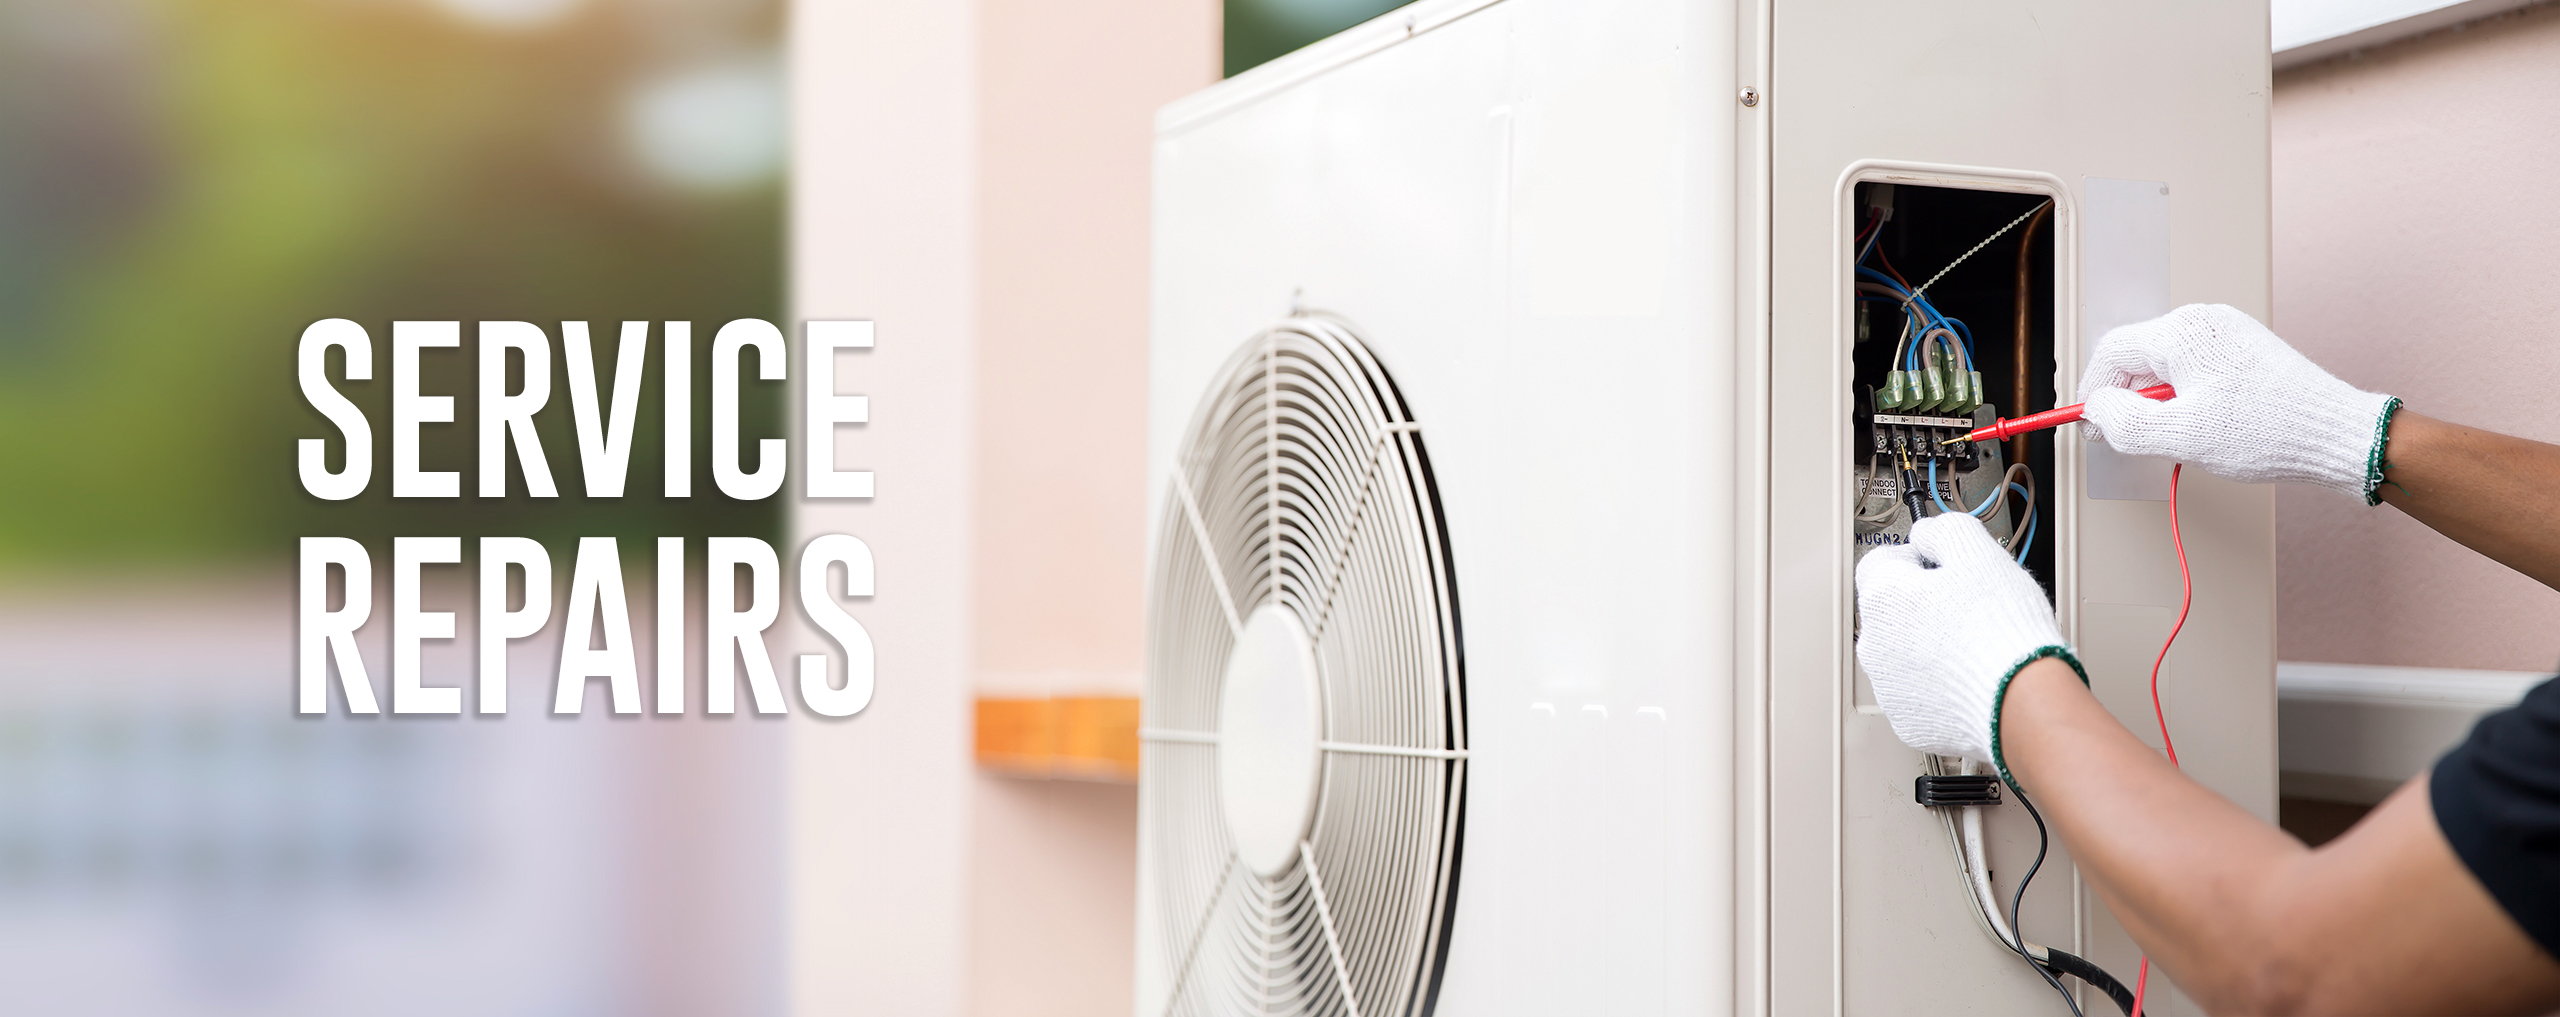 Ductless Heat Pump Repair Services